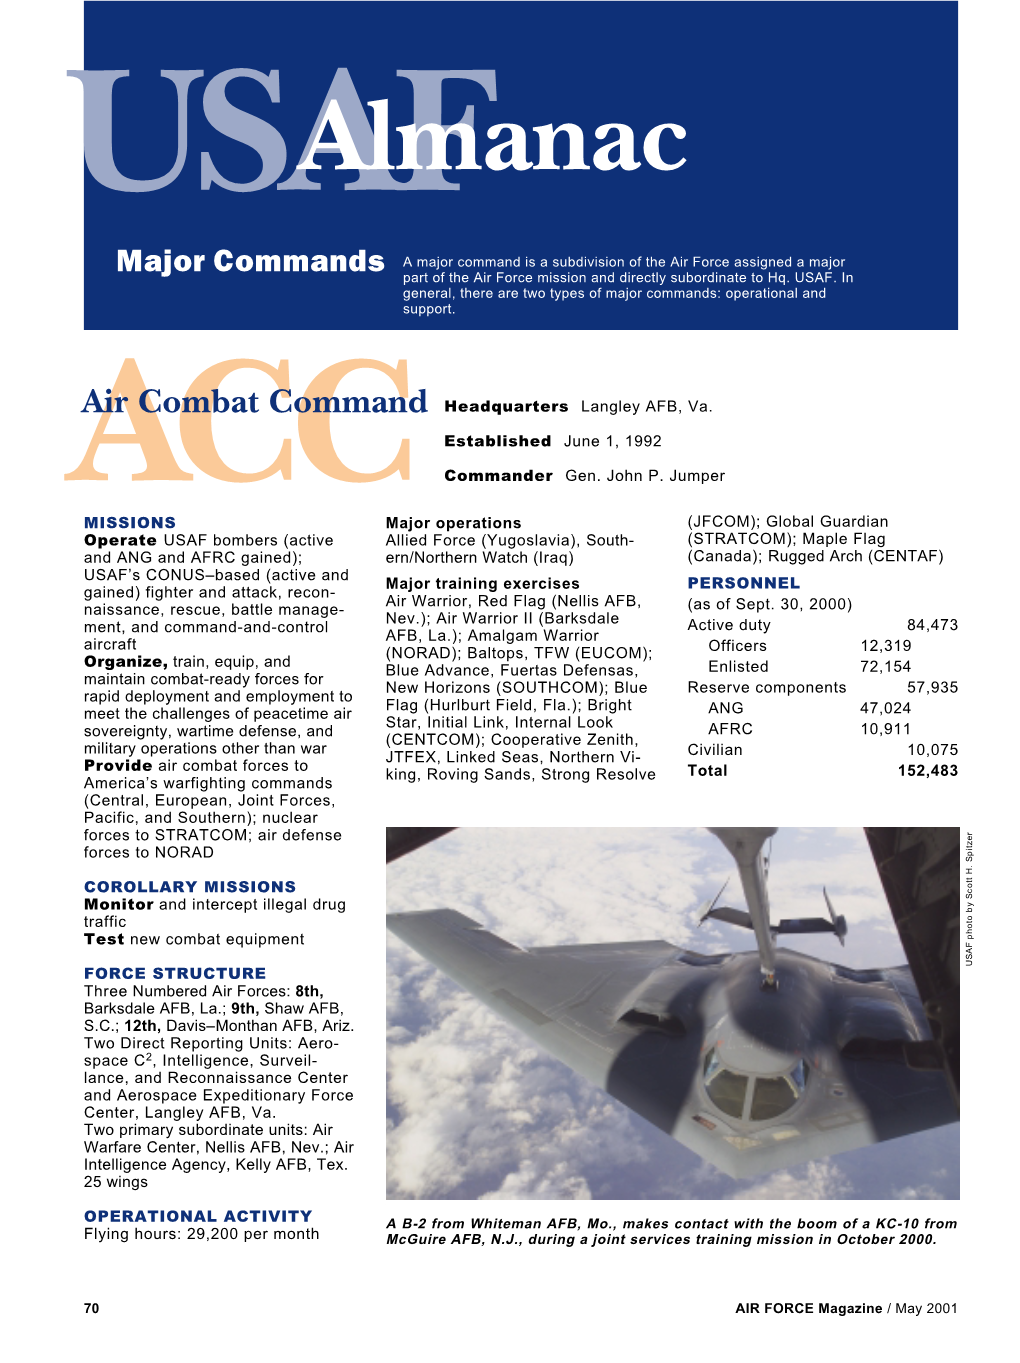 Usafalmanac � Major Commands a Major Command Is a Subdivision of the Air Force Assigned a Major Part of the Air Force Mission and Directly Subordinate to Hq